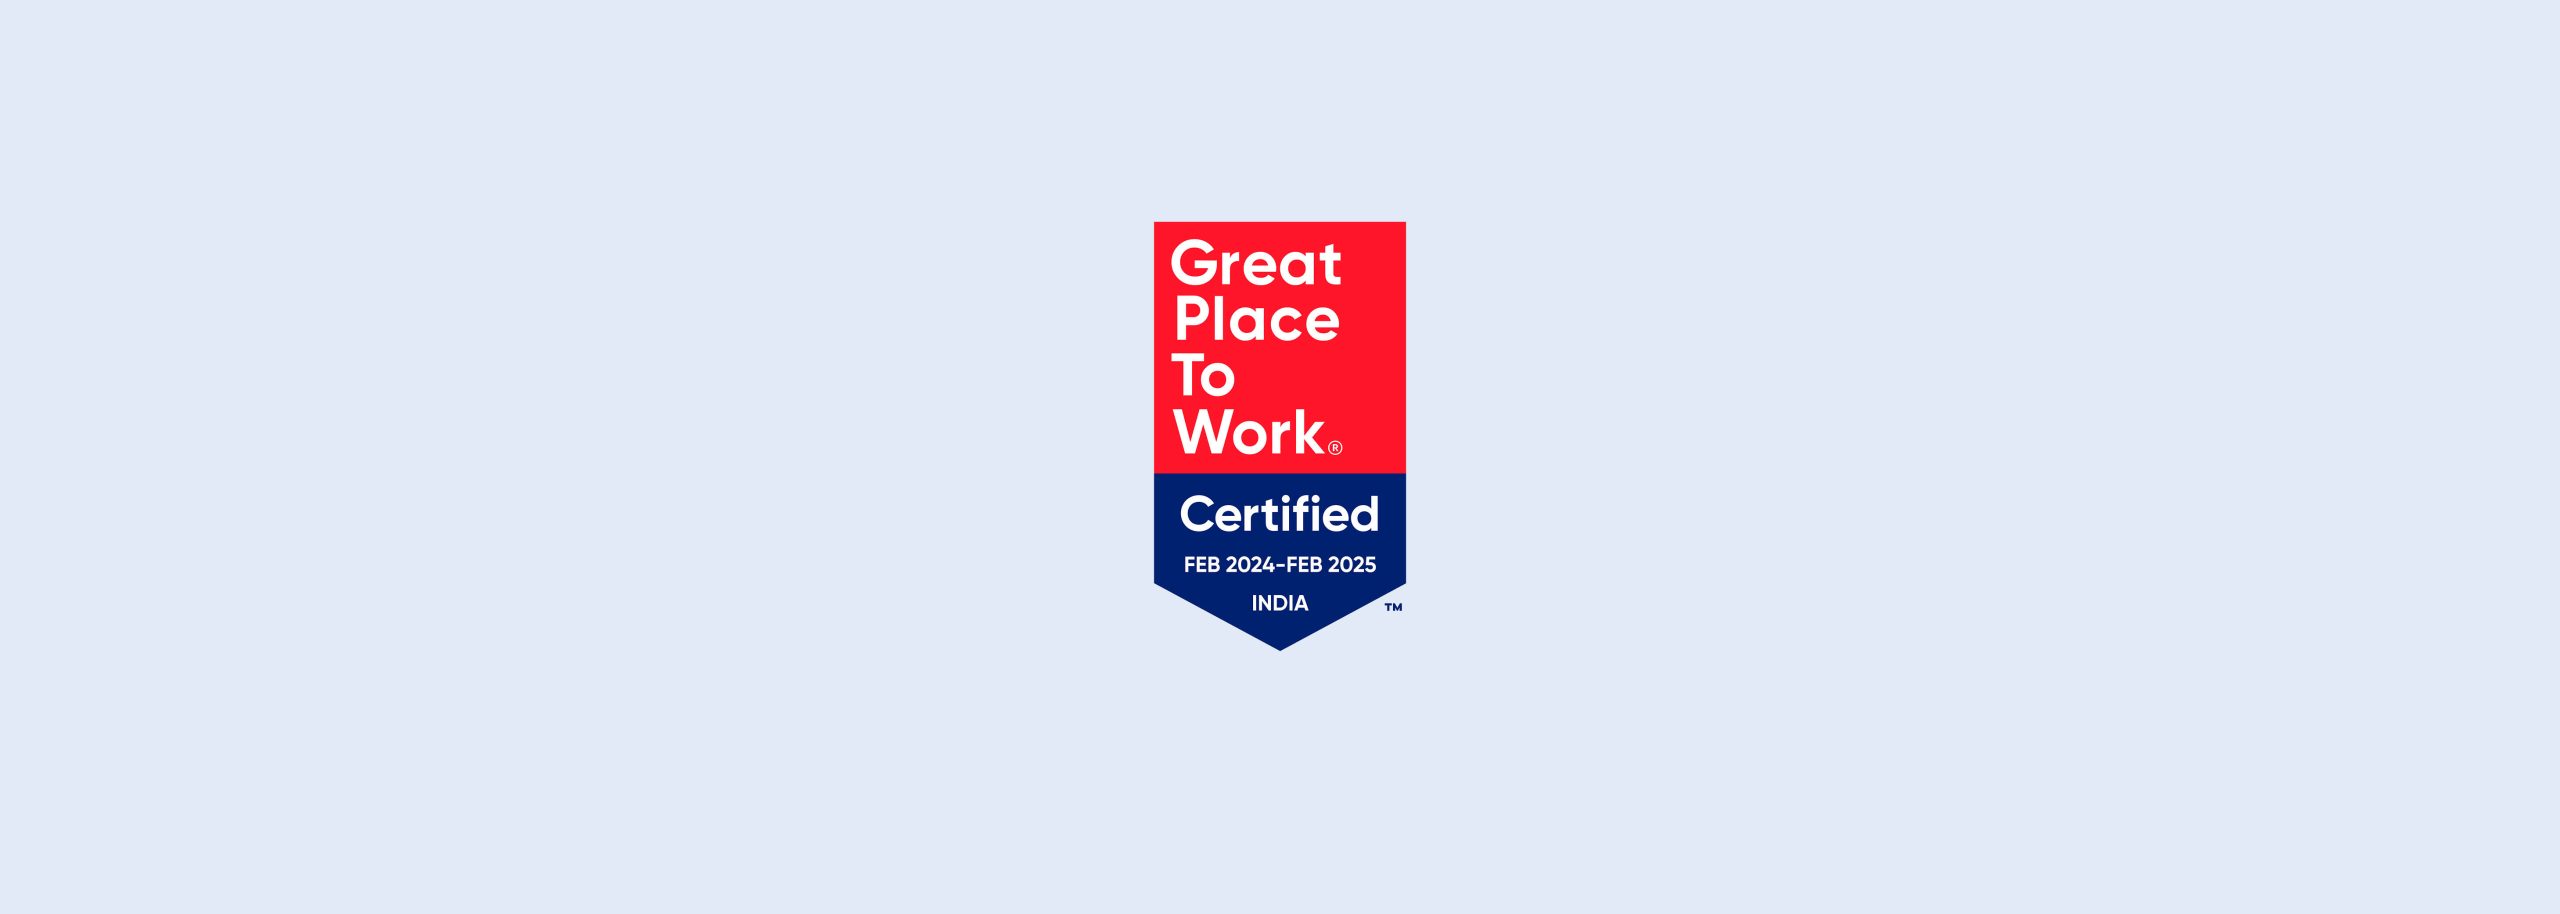 GPTW India Great place to work